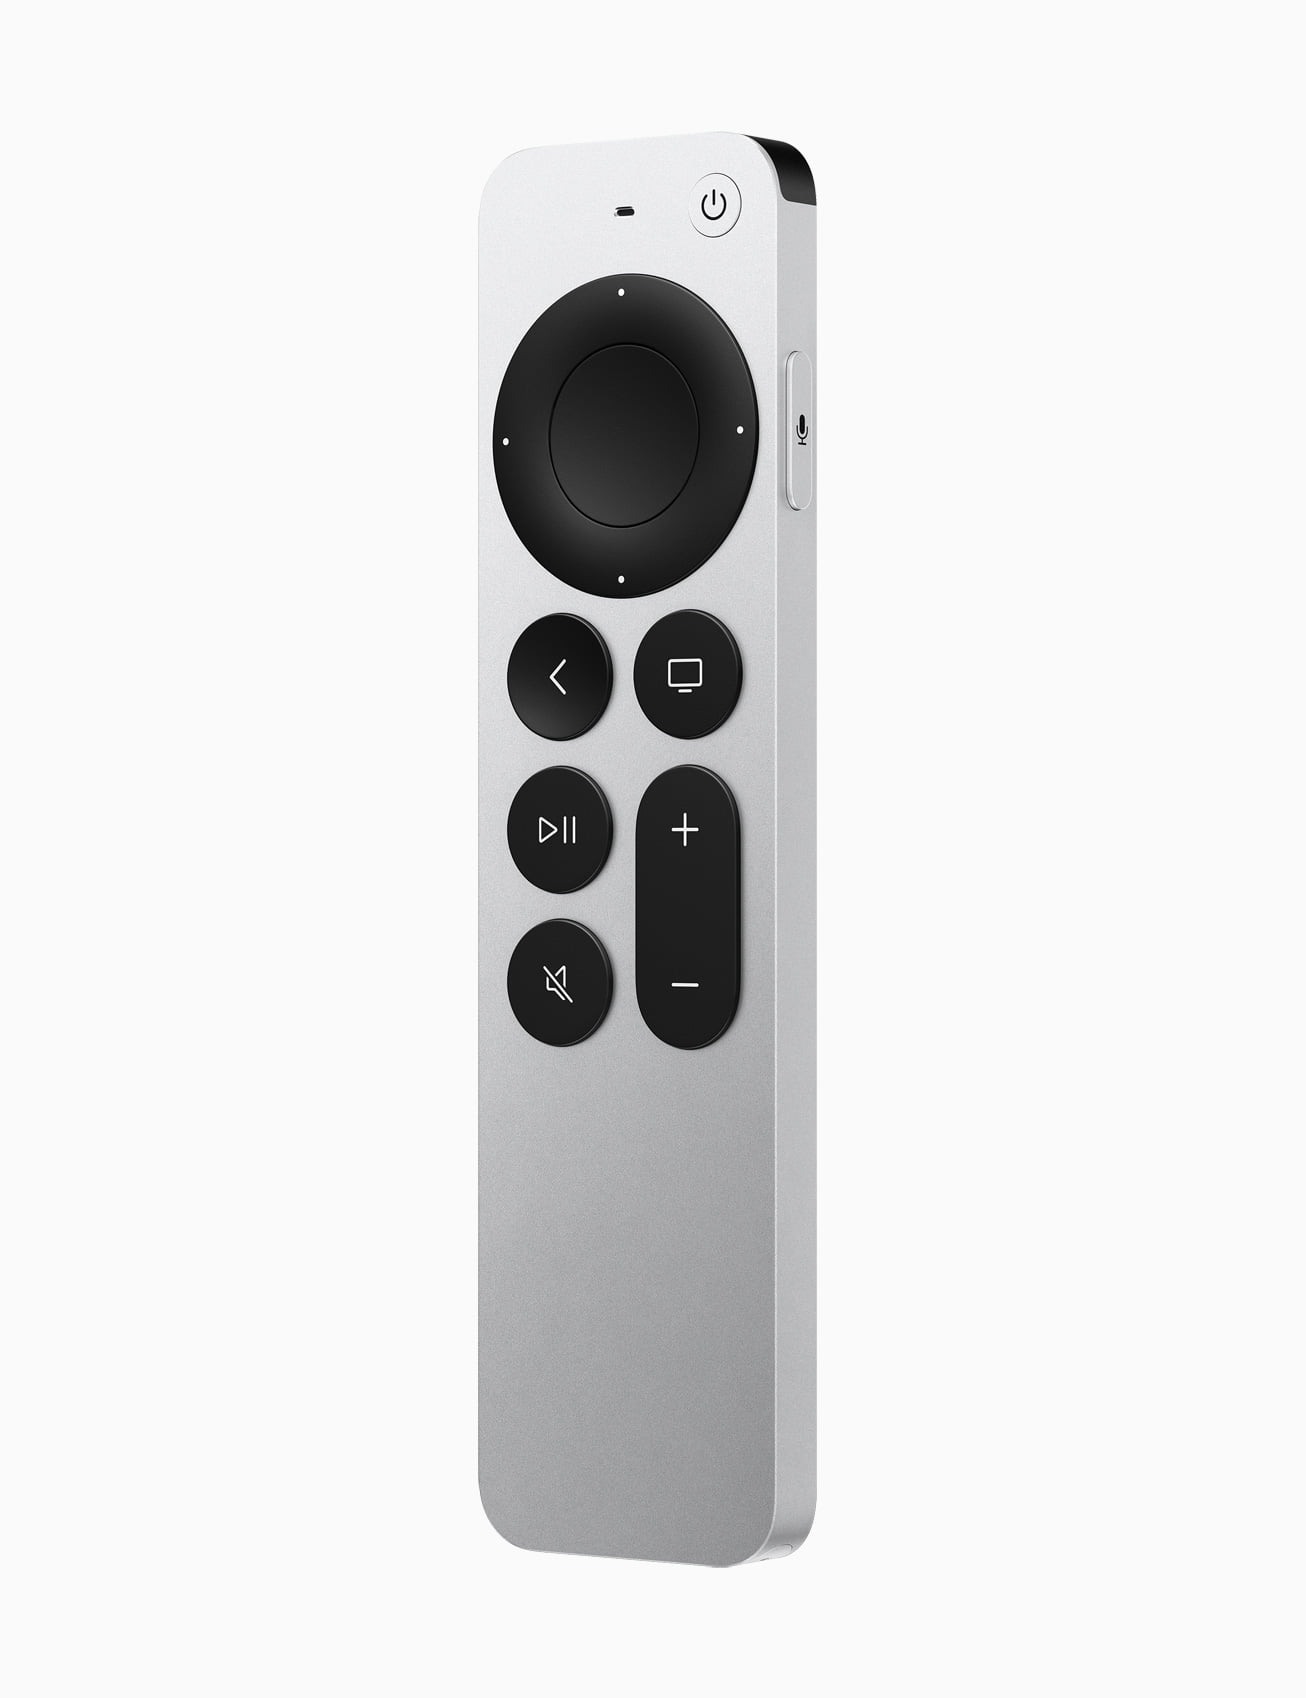 How to use your AppleTV with any IR remote, even if it’s not from Apple